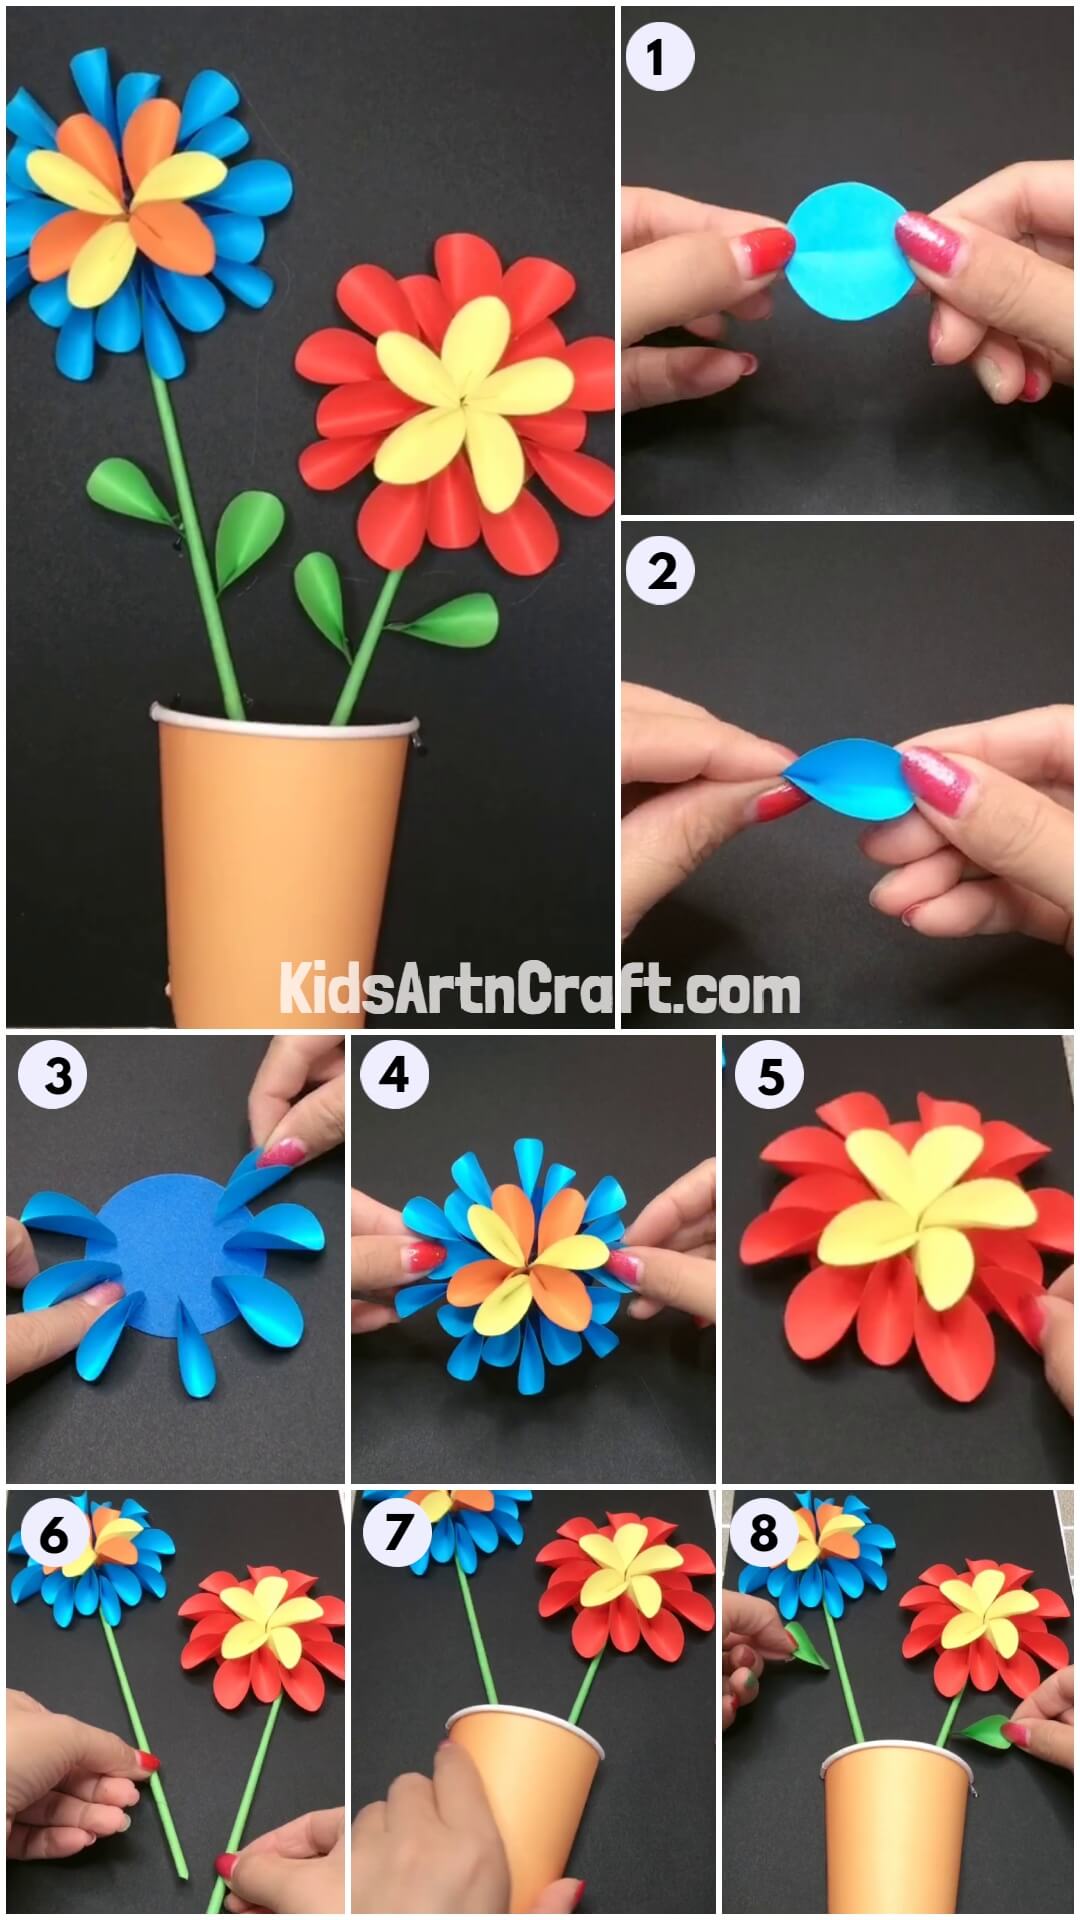 How to Make Paper Flower Craft With Paper Cup